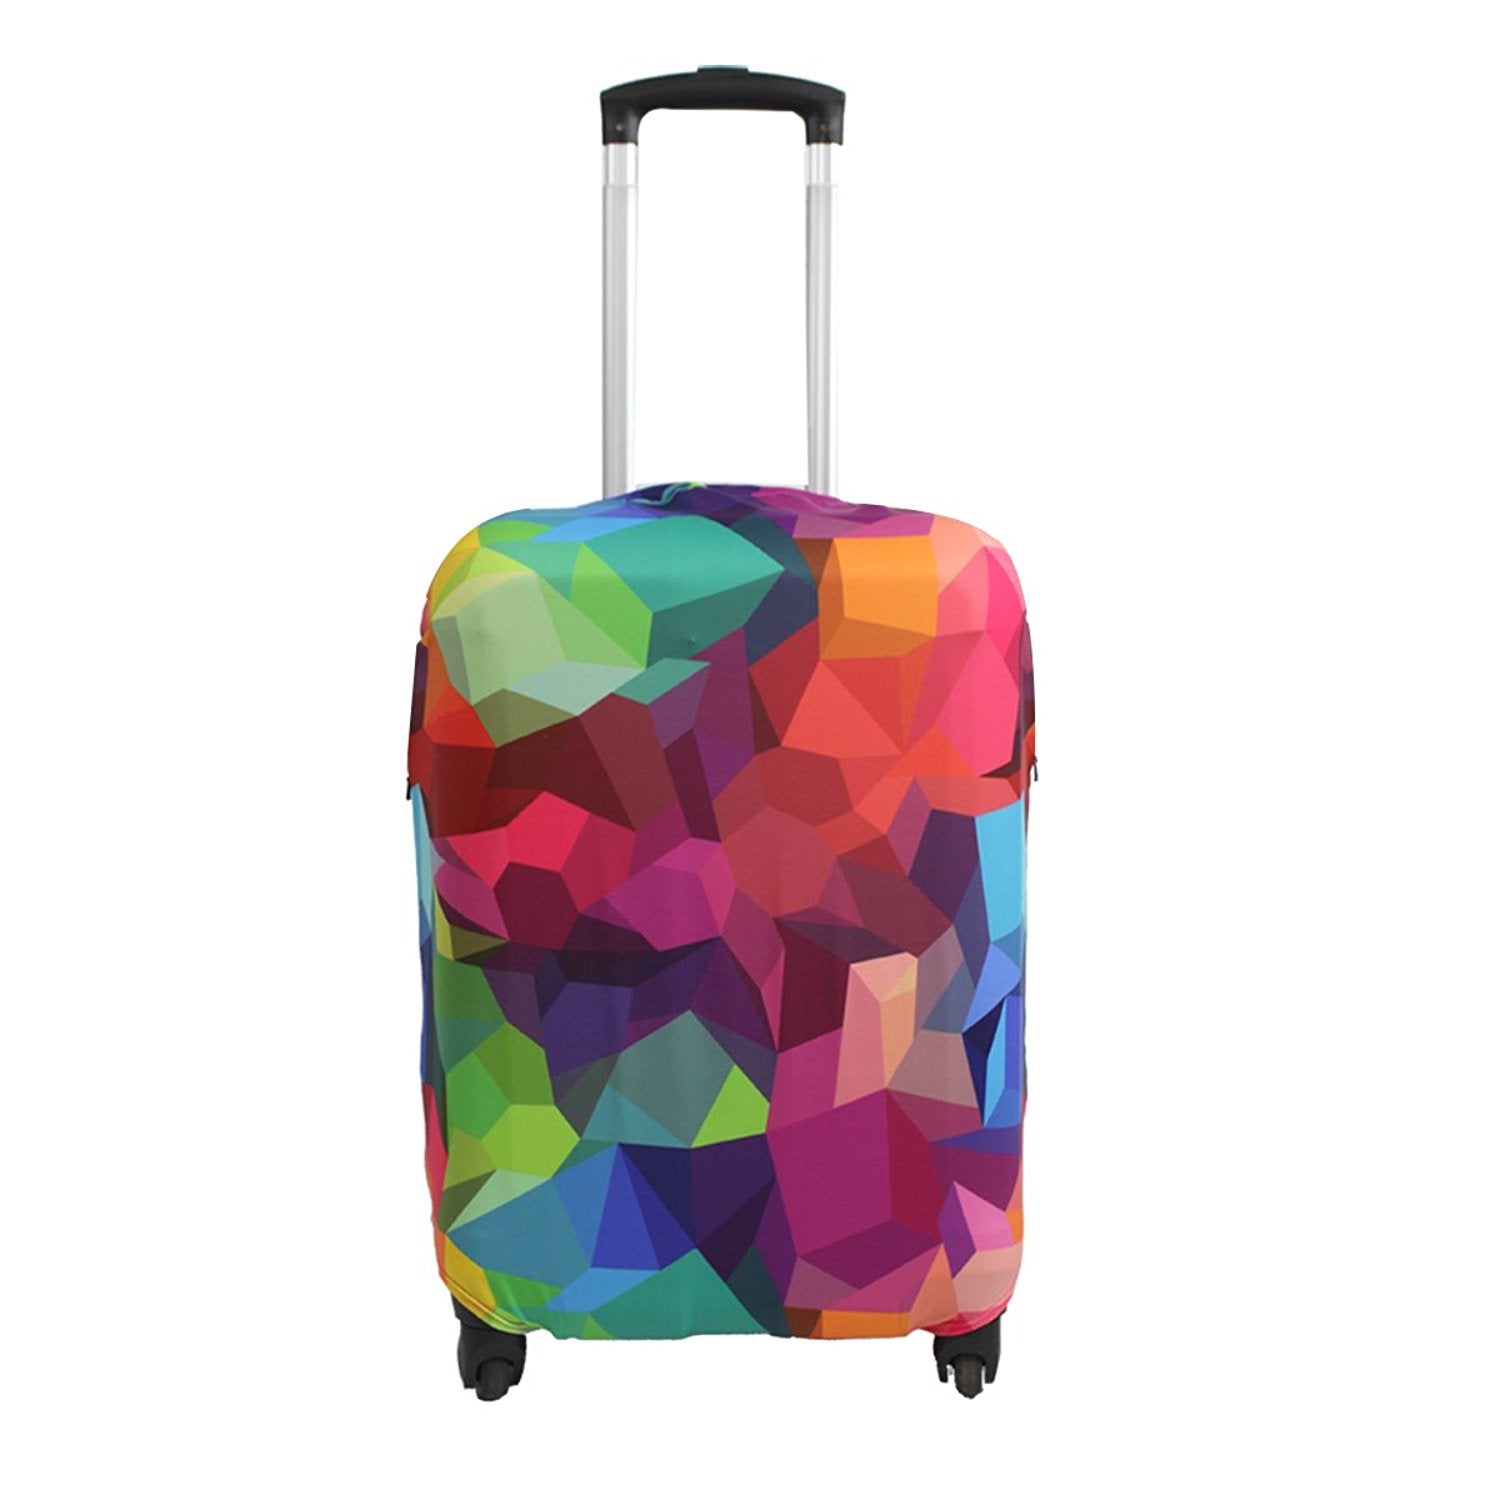 VibranceXT™ Protective Luggage Cover – Gallant Traveler